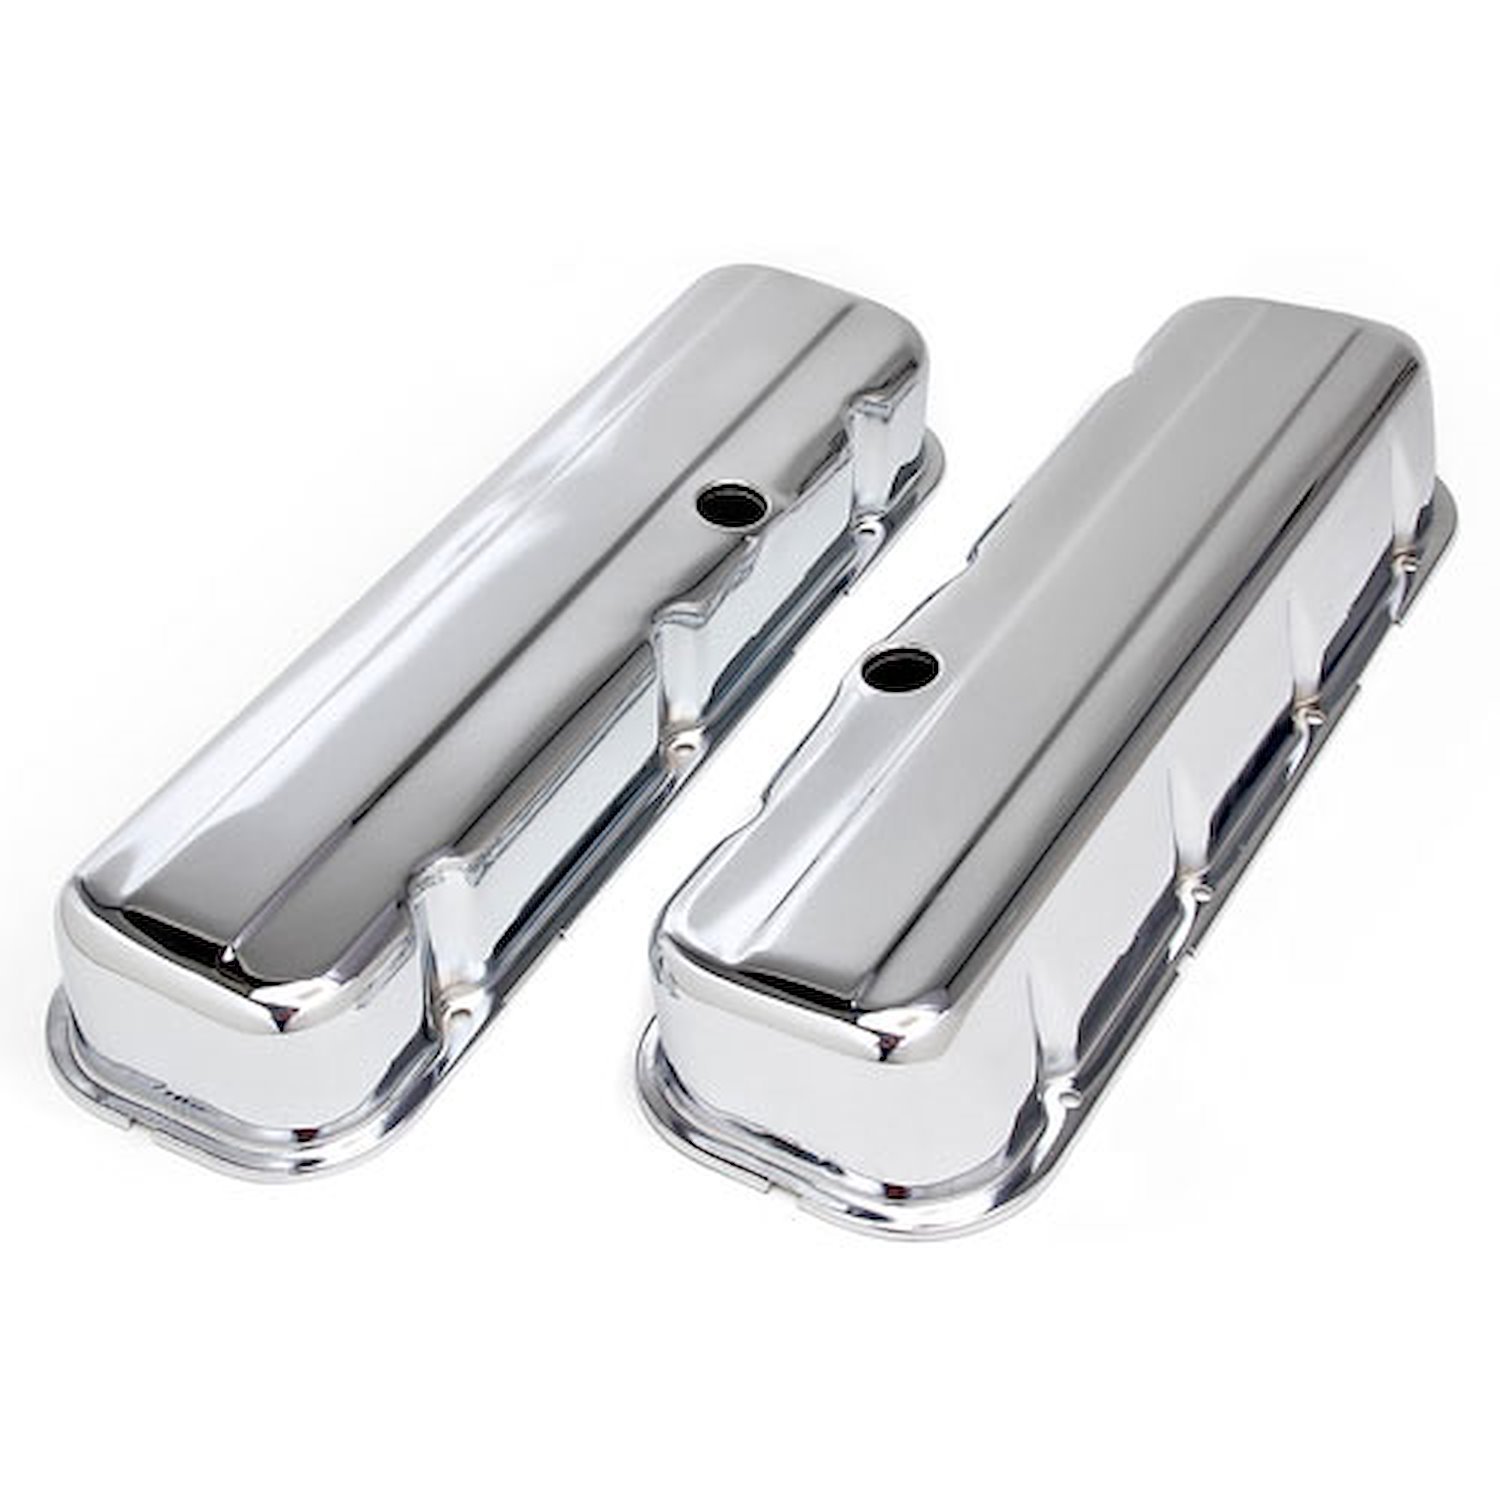 Chrome Plated Steel Valve Covers 1965-2000 Big Block Chevy 396-502 V8